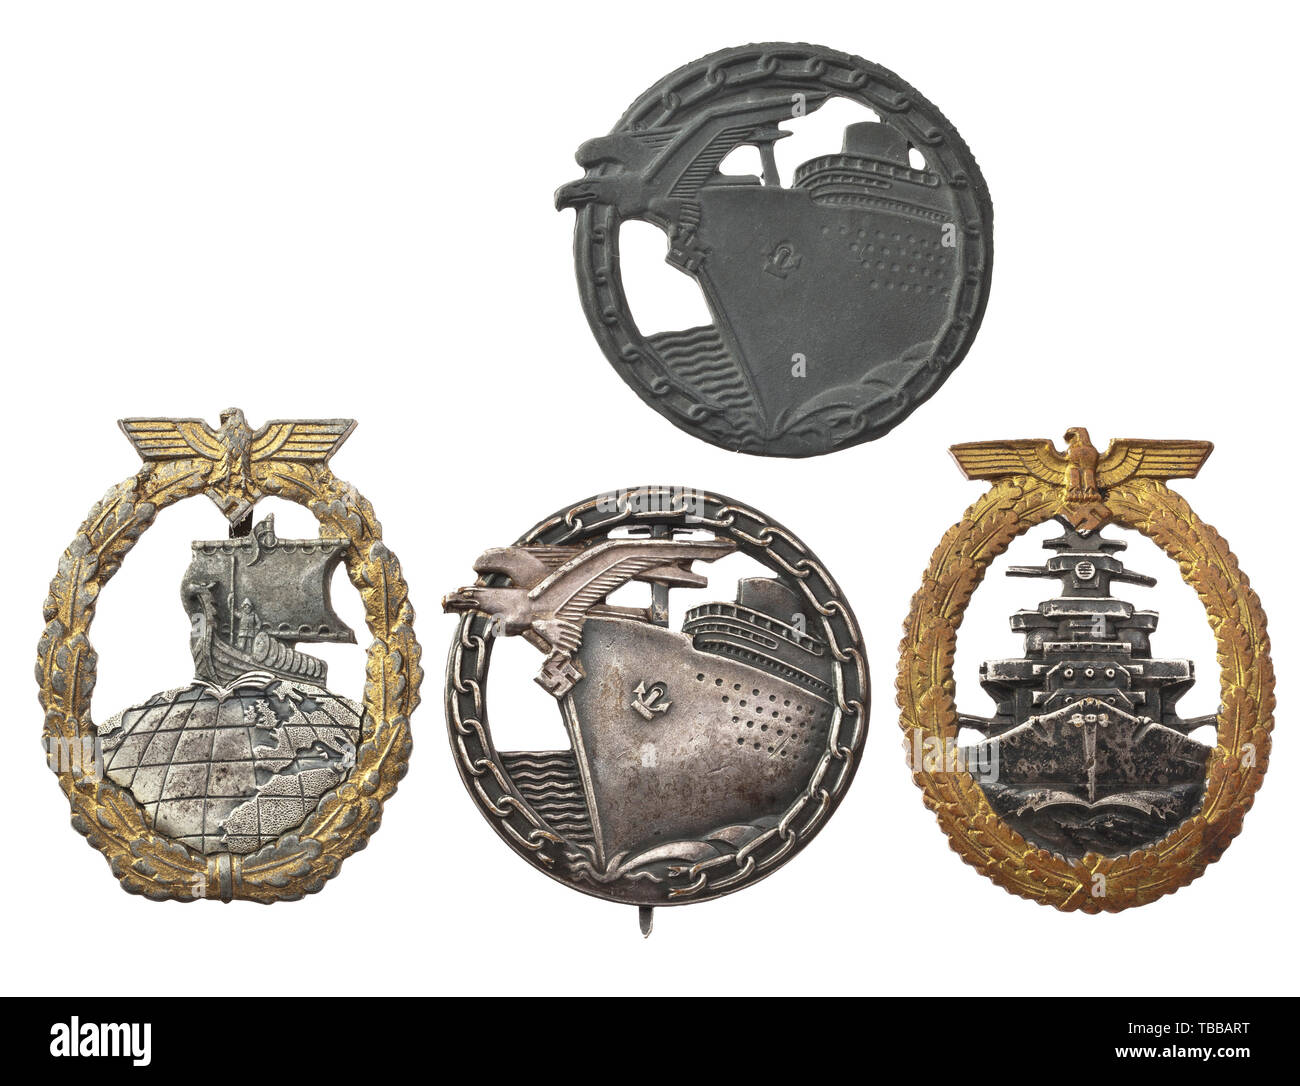 Four Marine war badges - auxiliary cruiser, blockade runner etc, High Sea Fleet Badge of maker 'SCHWERIN BERLIN' in non-ferrous metal. Auxiliary Cruiser War Badge of maker Steinhauer & Lück in Lüdenscheid made of zinc (type 4) with riveted globe and wide pin. Width 44 mm. Weight 27.8 g. Blockade Runner War Badge made by 'SCHWERIN' in non-ferrous metal as well as a further, thin, unfinished example without pin system. historic, historical 20th century, Editorial-Use-Only Stock Photo